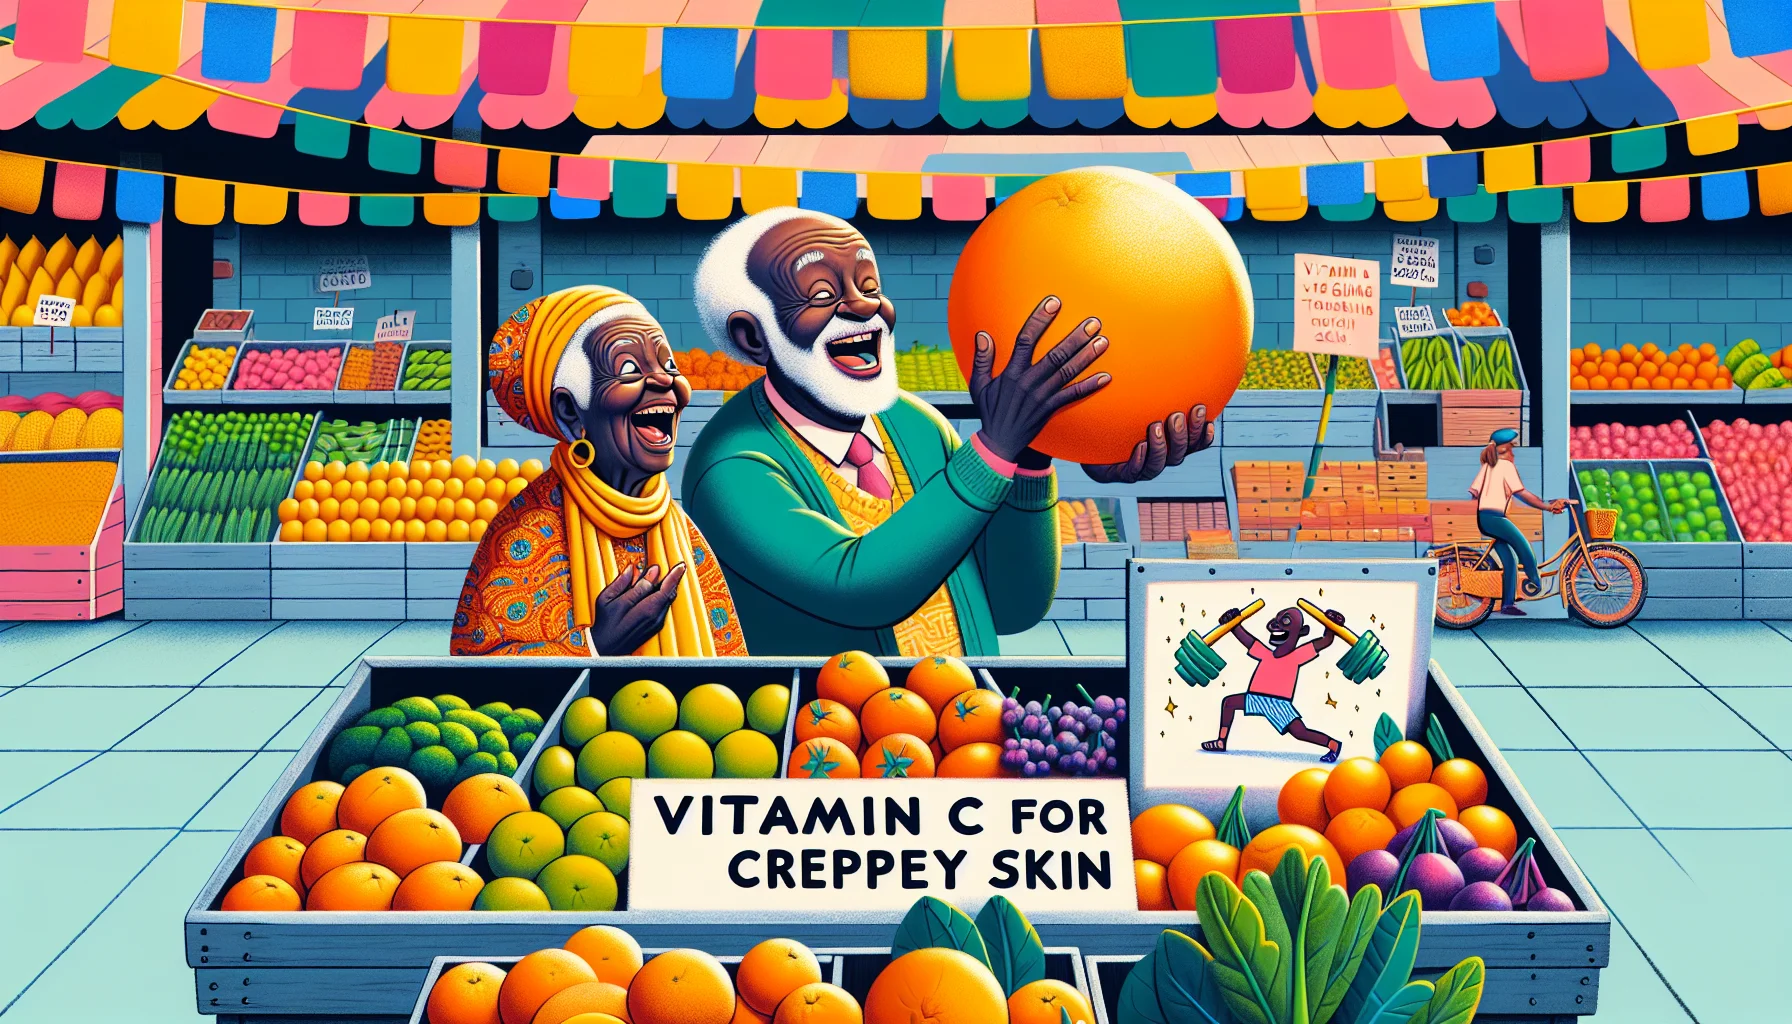 Illustrate a humorous yet realistic situation where an elderly Caucasian man and a Black woman, both full of life, are at a healthy food market. They're humorously inspecting fruits and vegetables, expressing exaggerated surprise and joy. They are reading a sign on a stall that advertises 'Vitamin C for crepey skin' with a cartoon drawing of an orange lifting weights. They are playfully exchanging an enormous, vibrant orange, chuckling about its benefits for their skin. Further background depicts an array of stalls filled with colorful fresh produce.